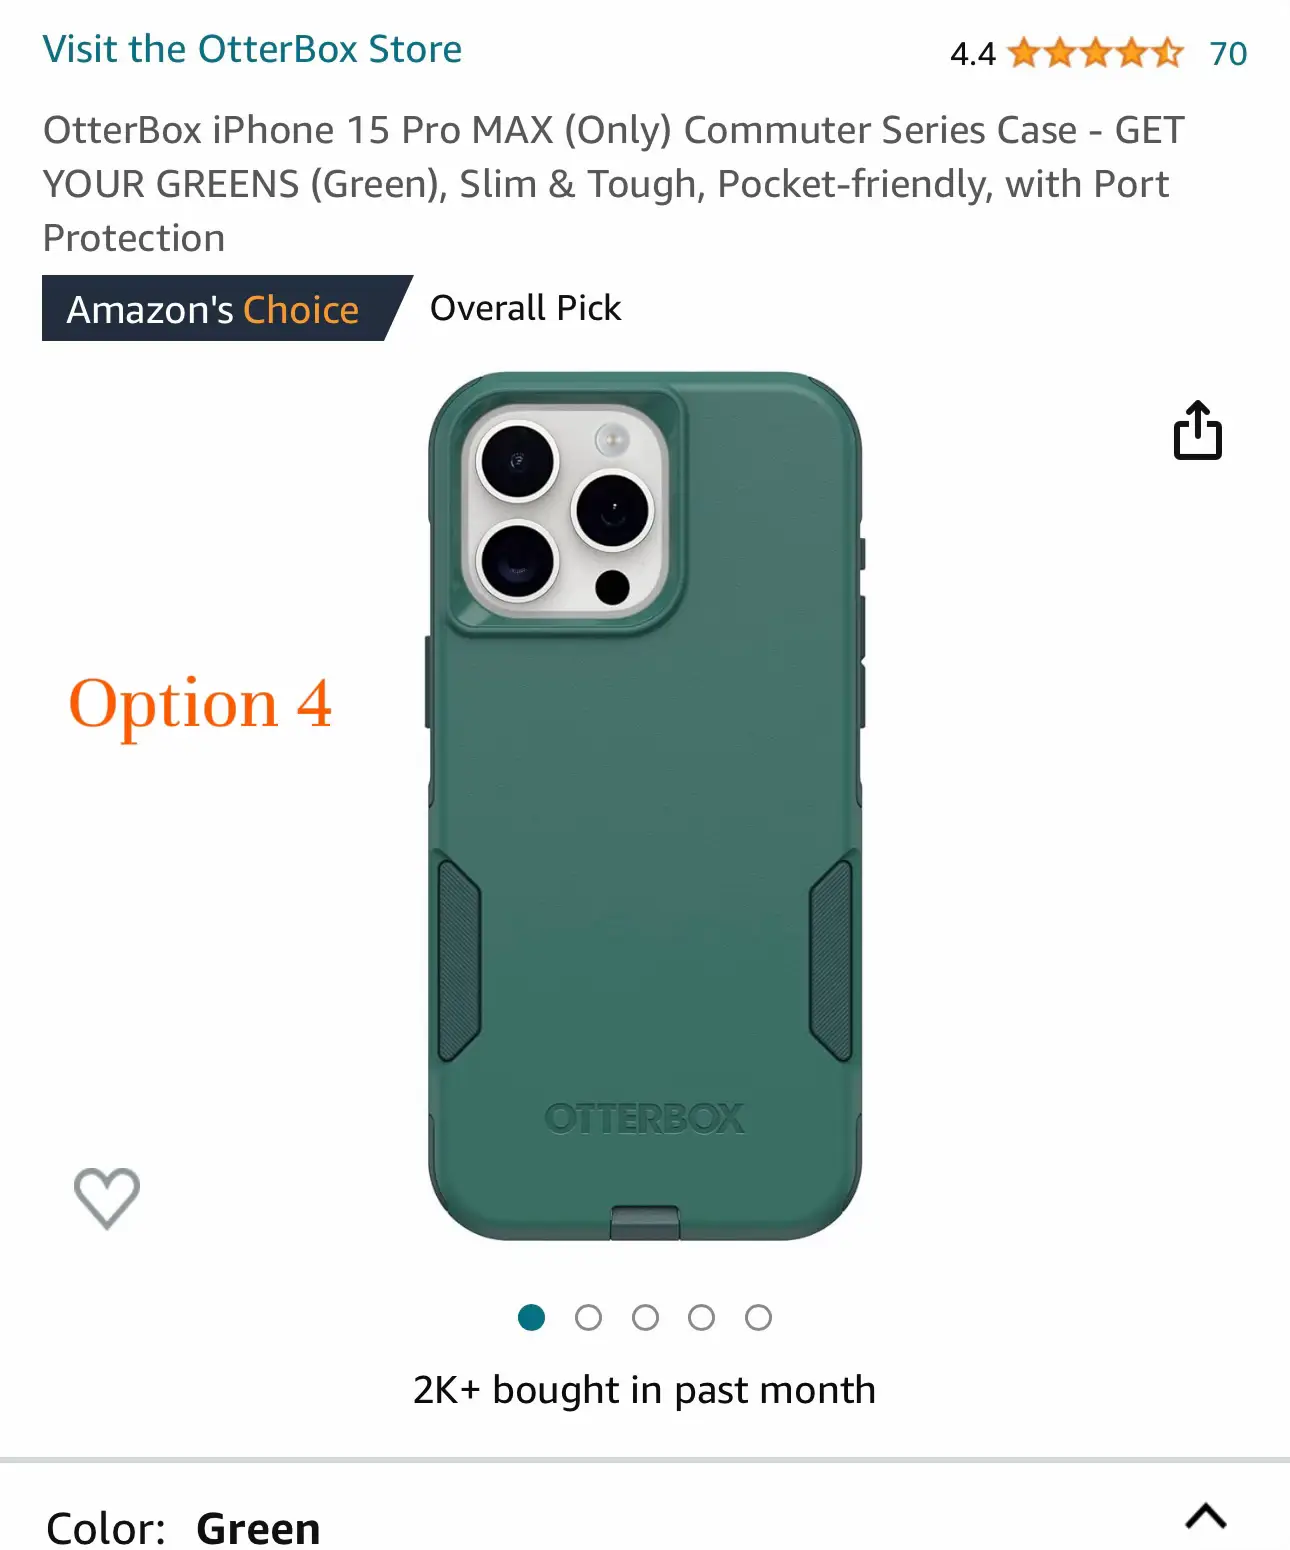 Otterbox iPhone 14 & iPhone 13 Commuter Series Case - TREES COMPANY  (Green), Slim & Tough, Pocket-Friendly, with Port Protection